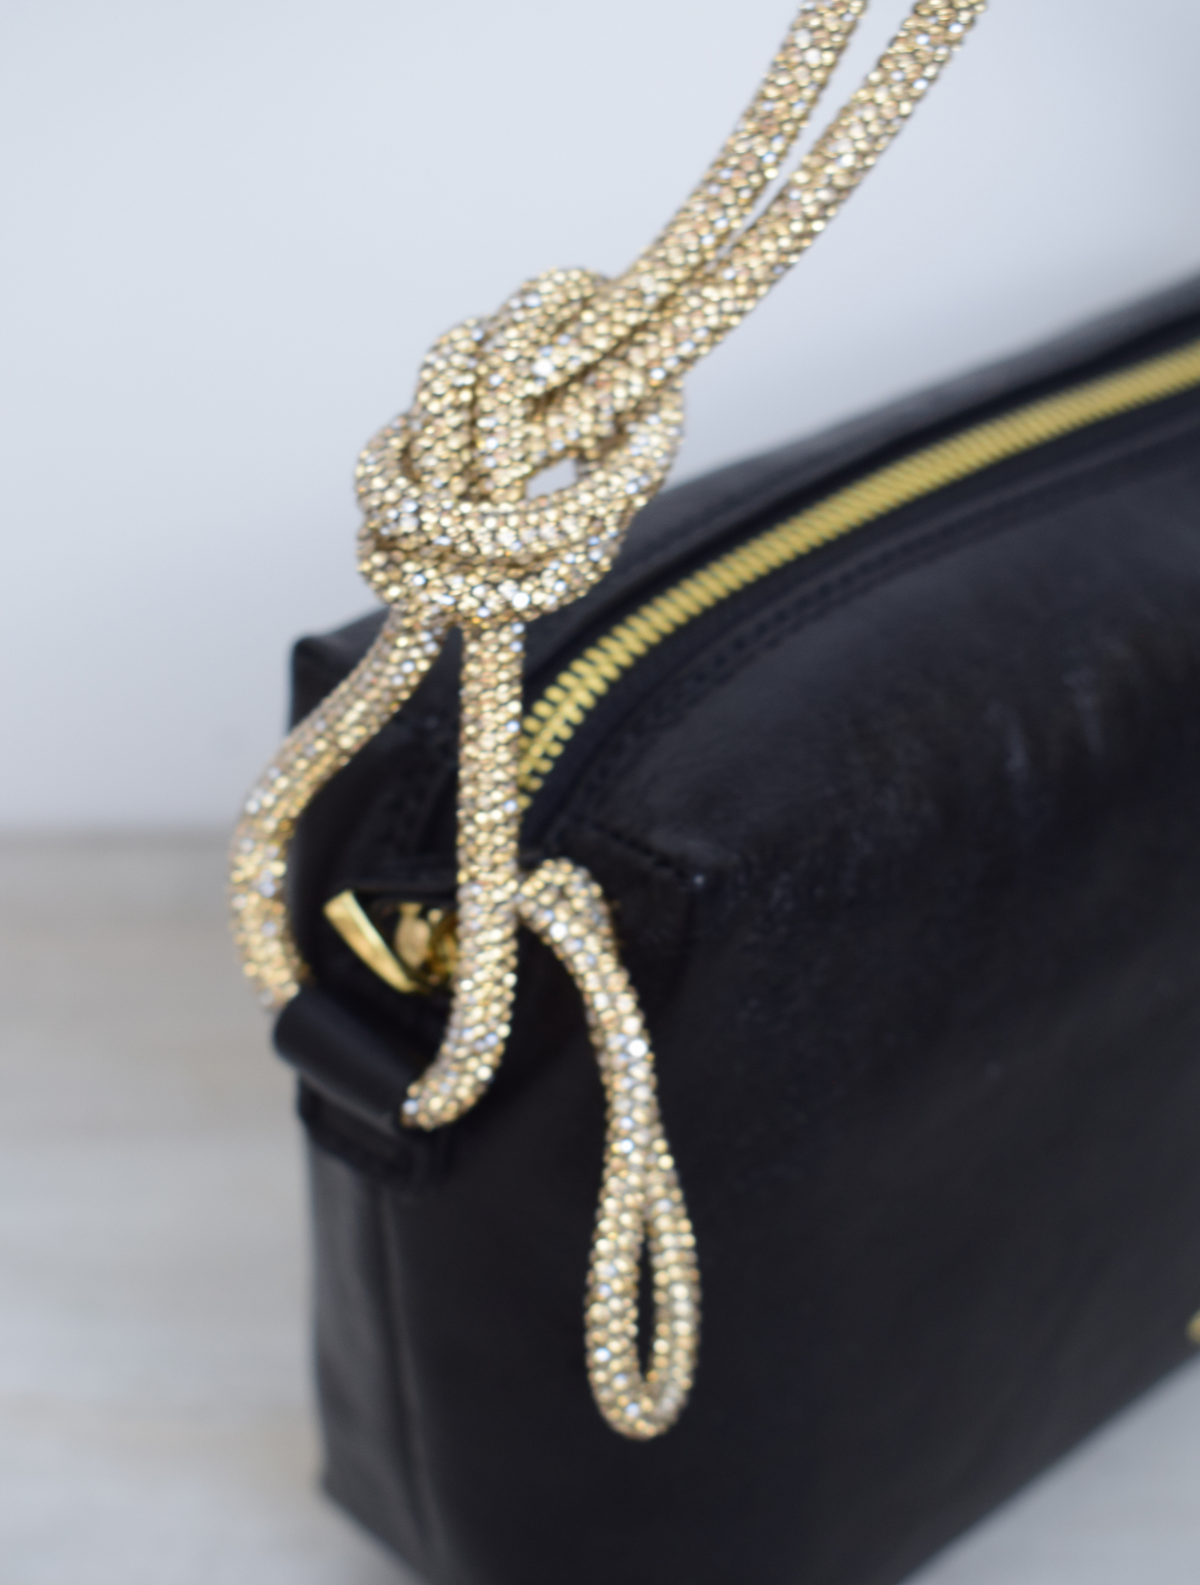 Black bag with gold rope handle